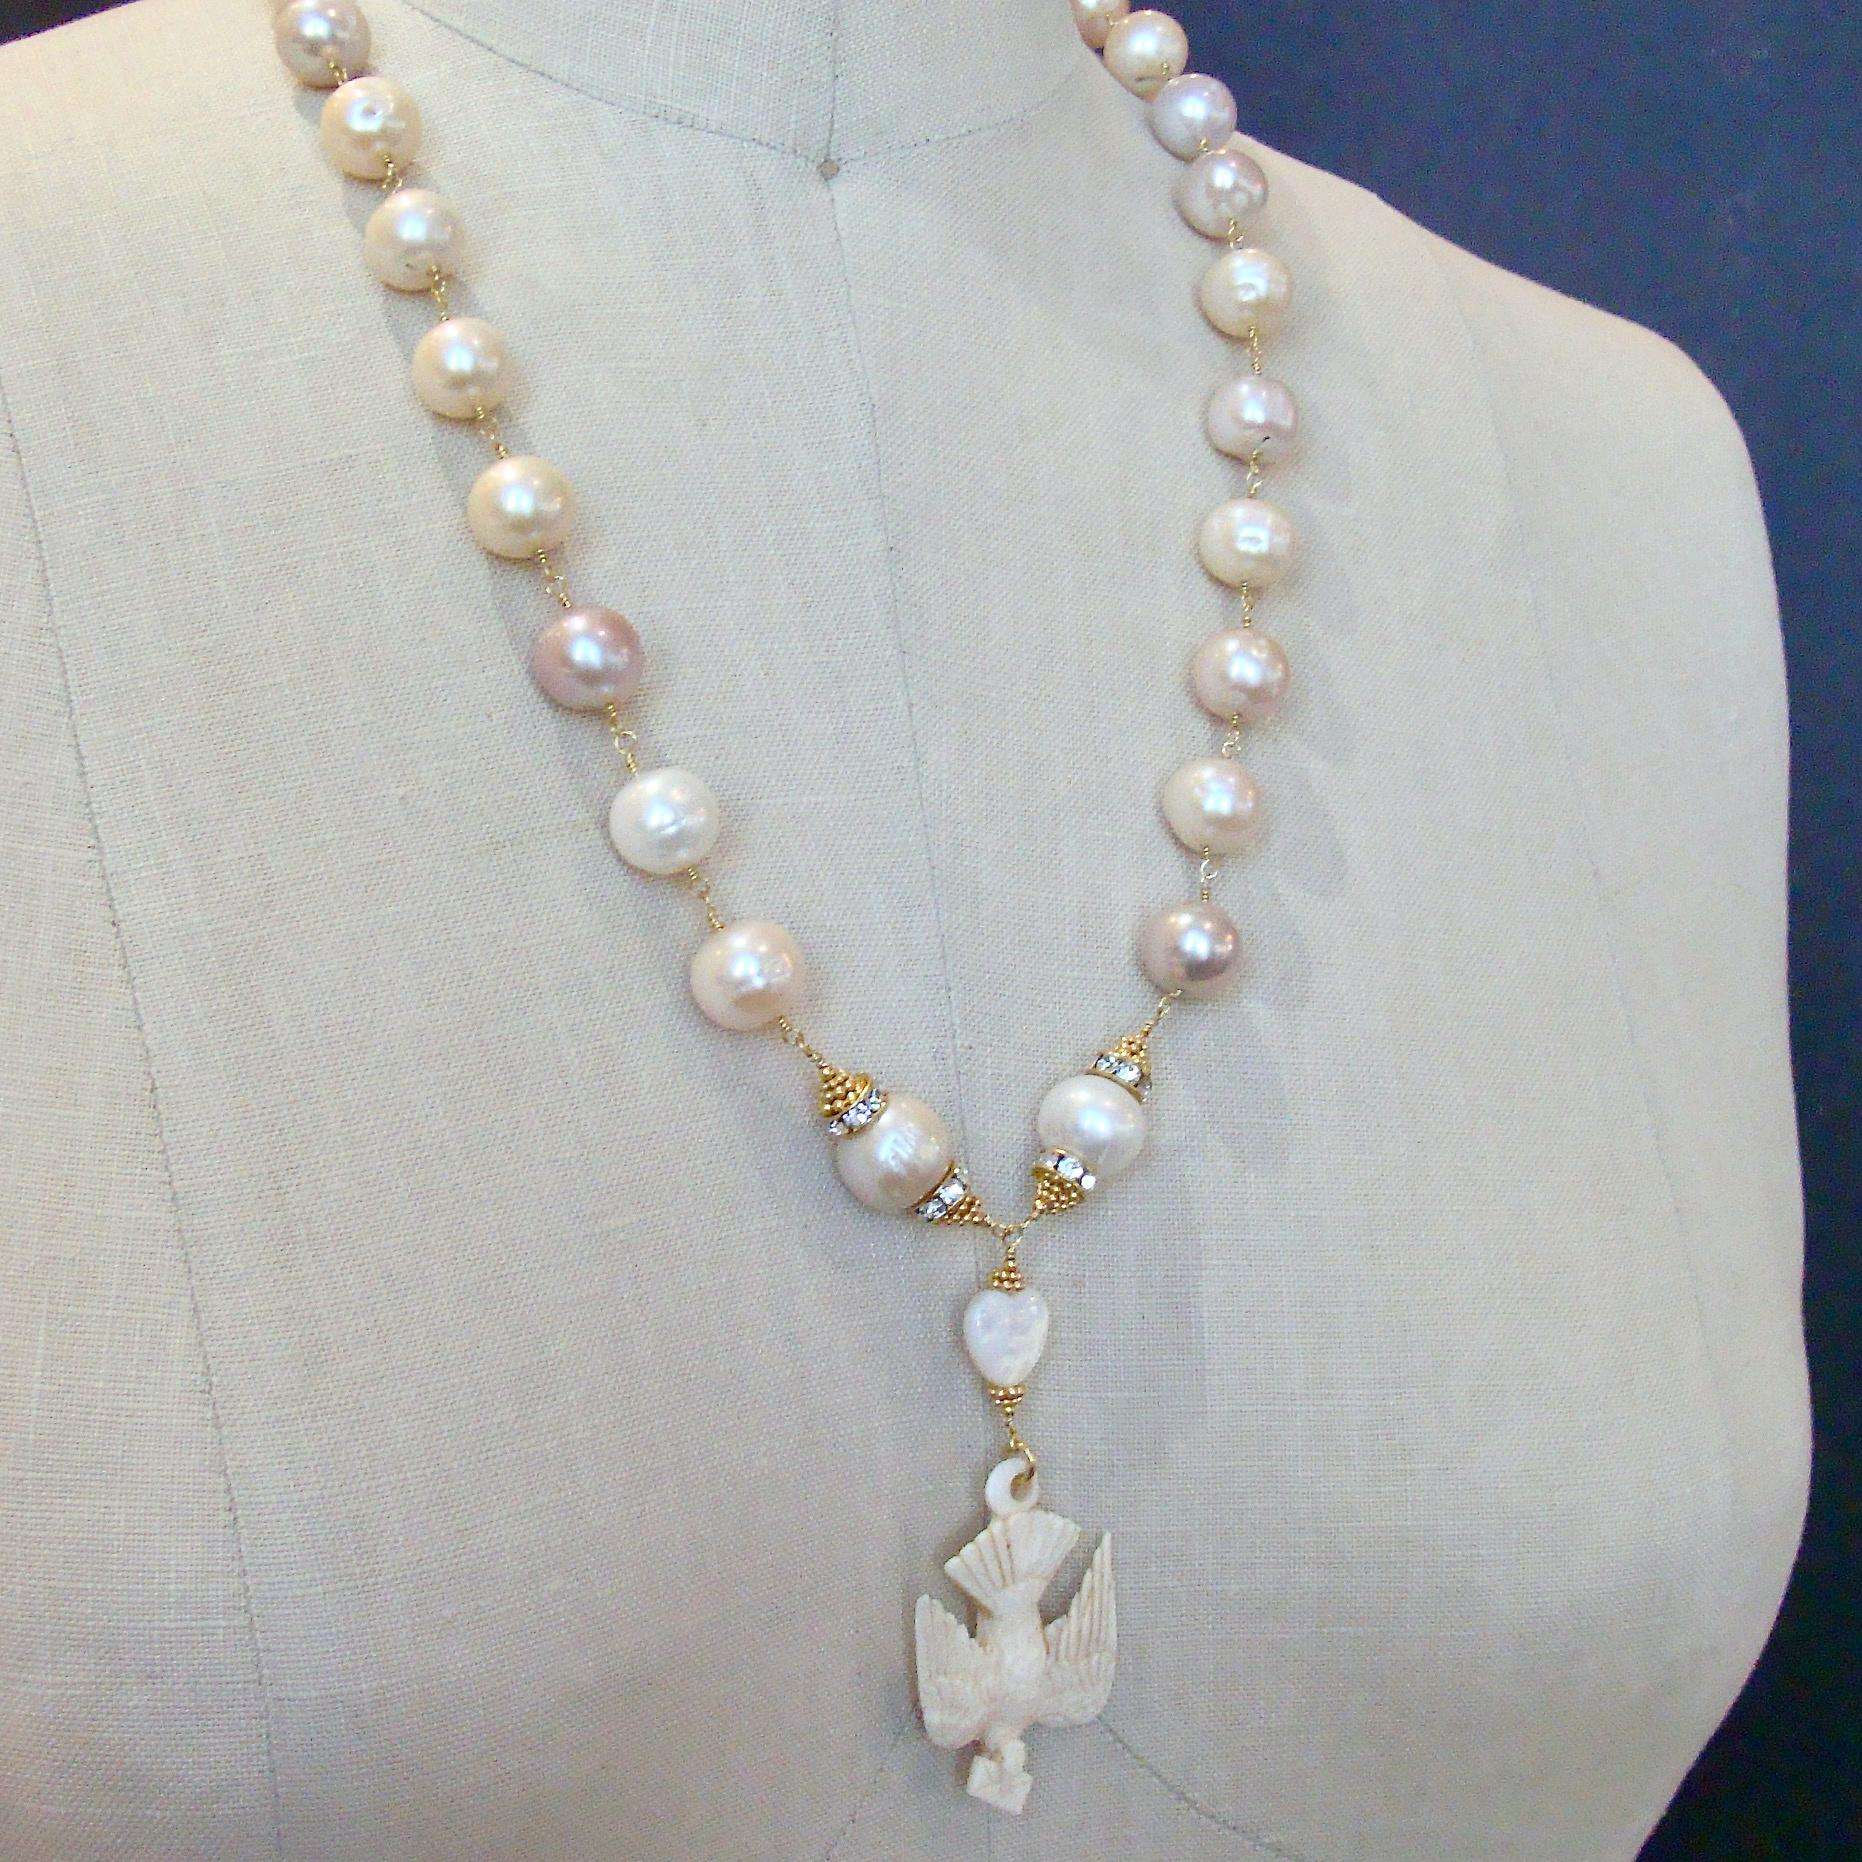 Saint Esprit Dove with Love Note Natural Pink Peach Baroque Cultured Pearls 2